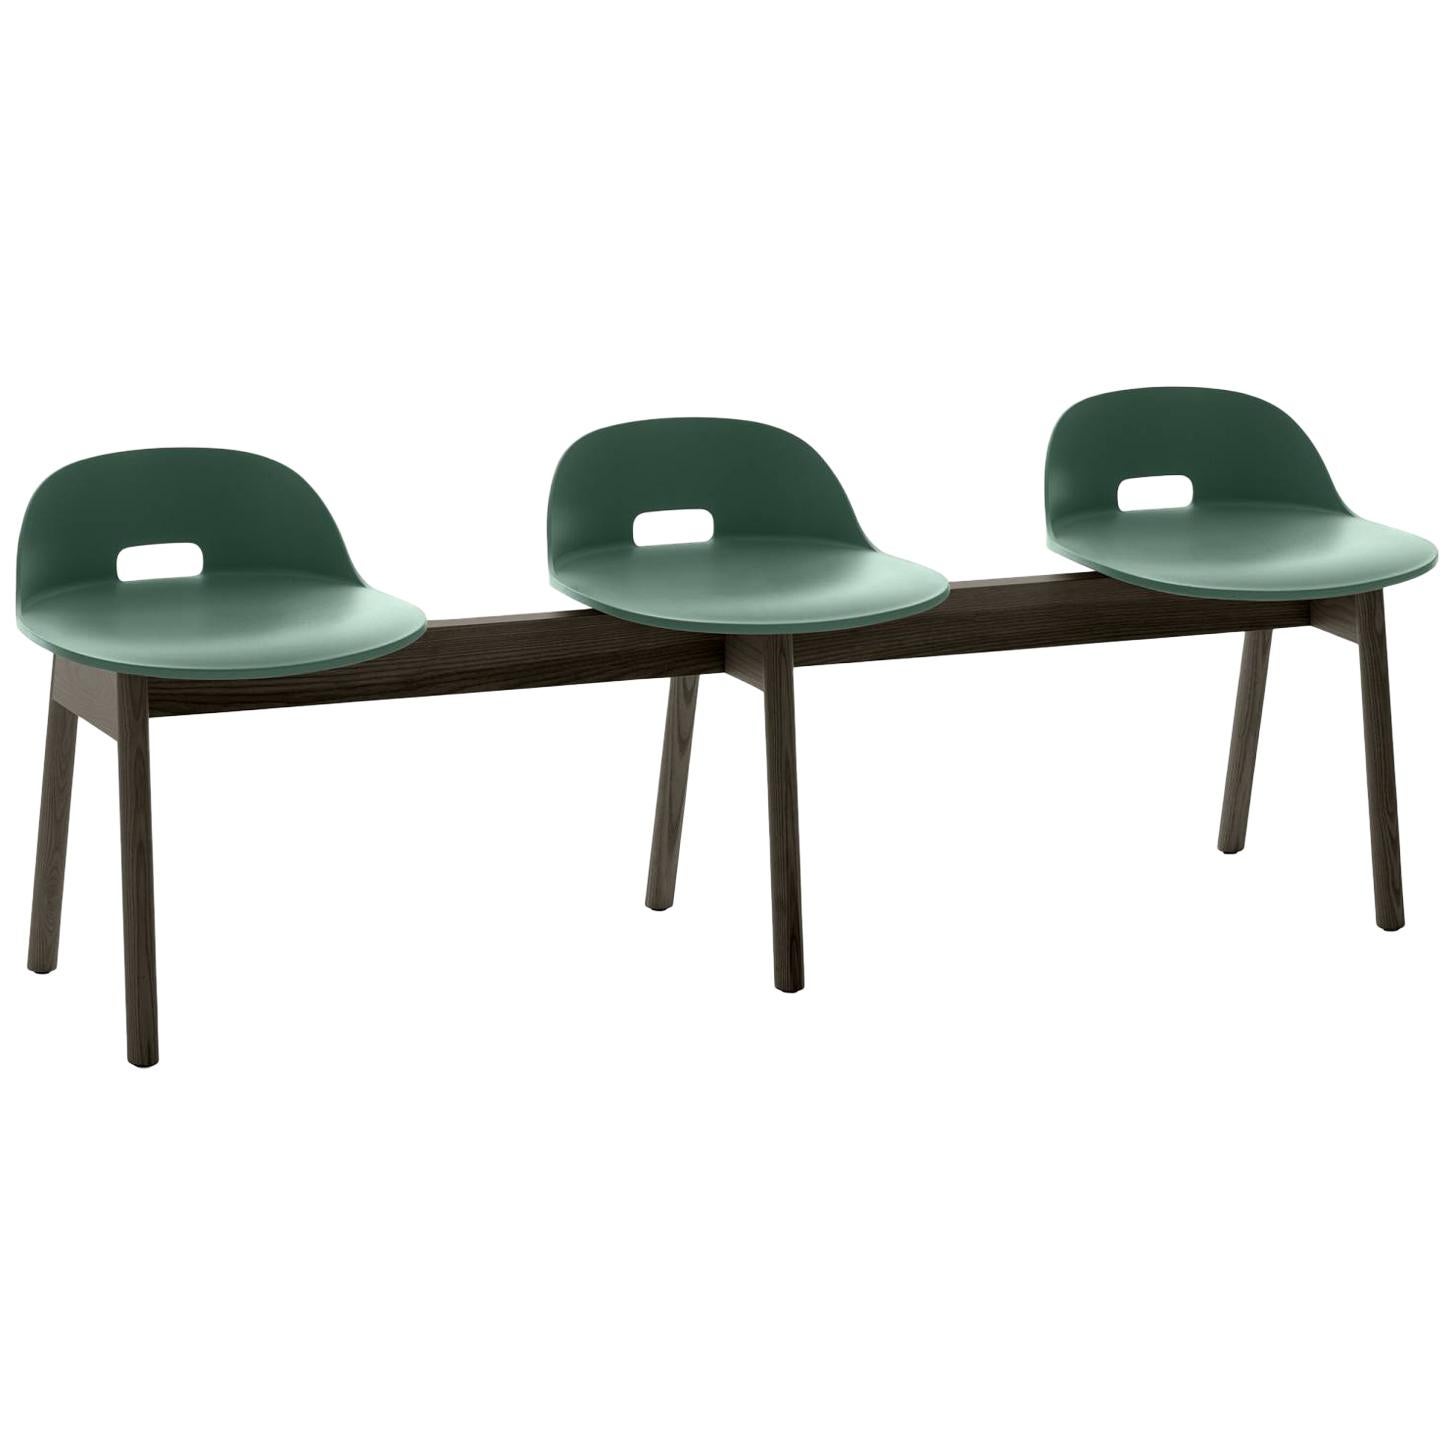 Emeco Alfi 3-Seat Bench in Green and Dark Ash with Low Back by Jasper Morrison For Sale